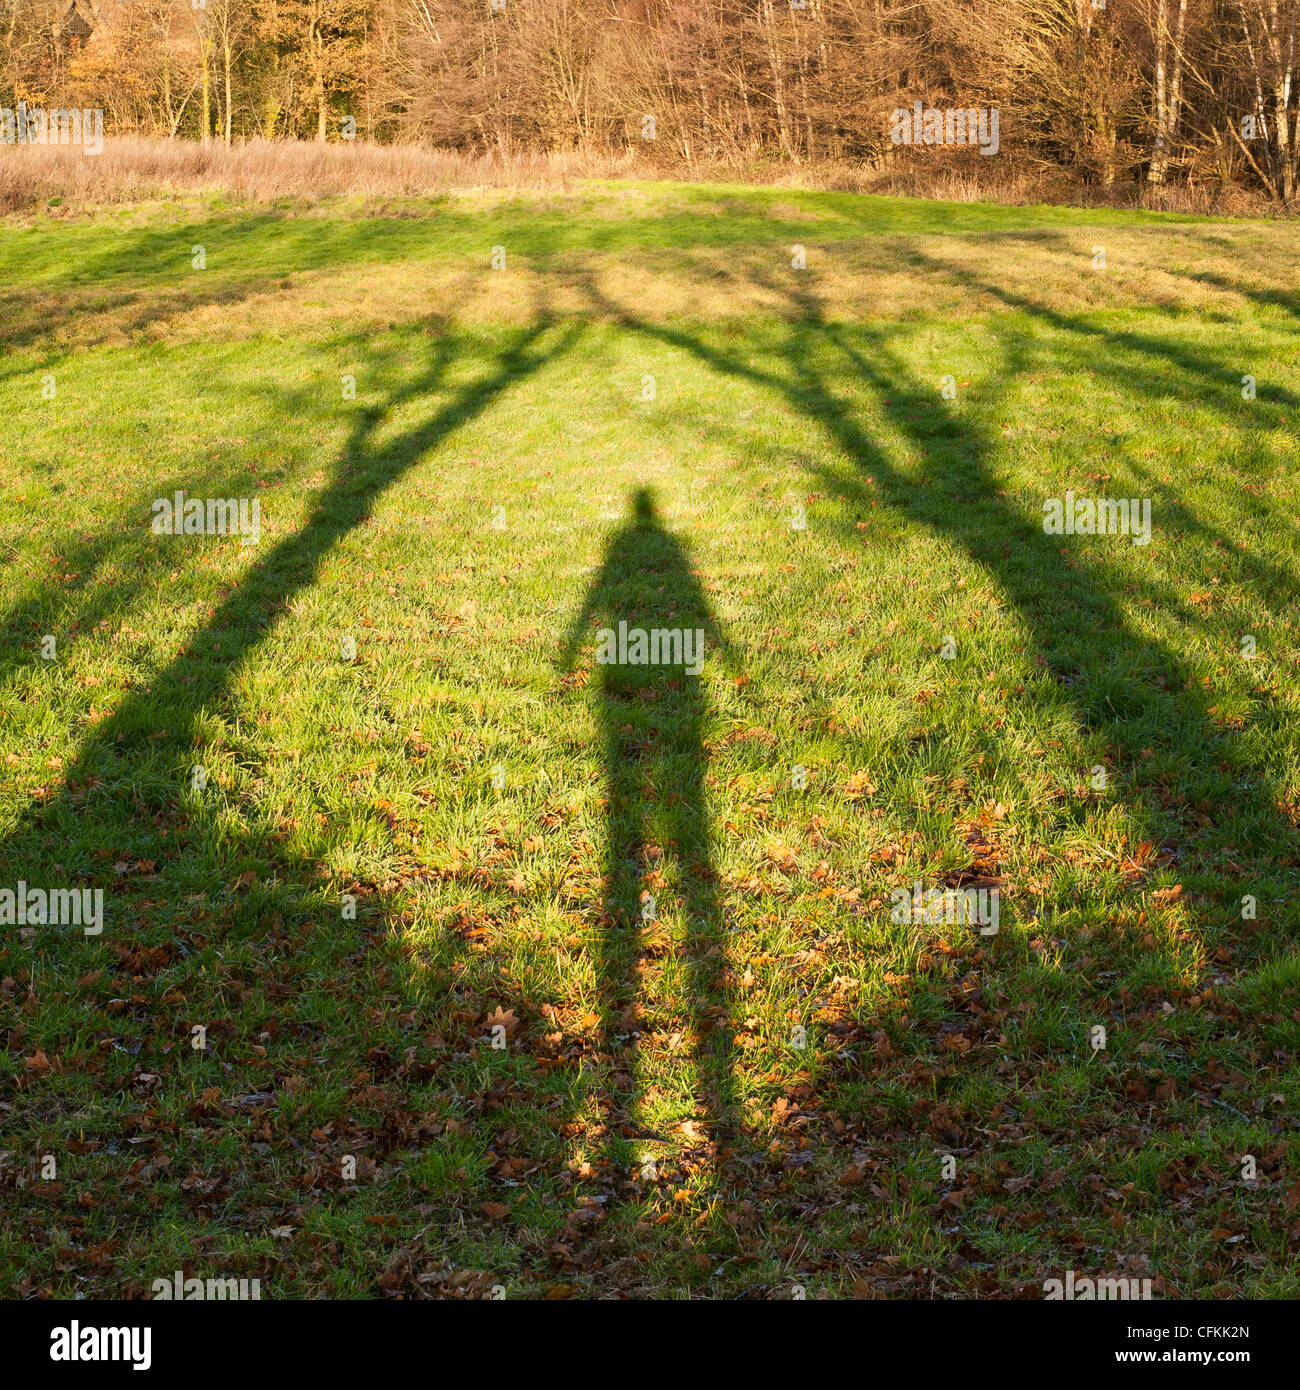 Shadow of a person standing amongst trees in the countryside UK Stock Photo